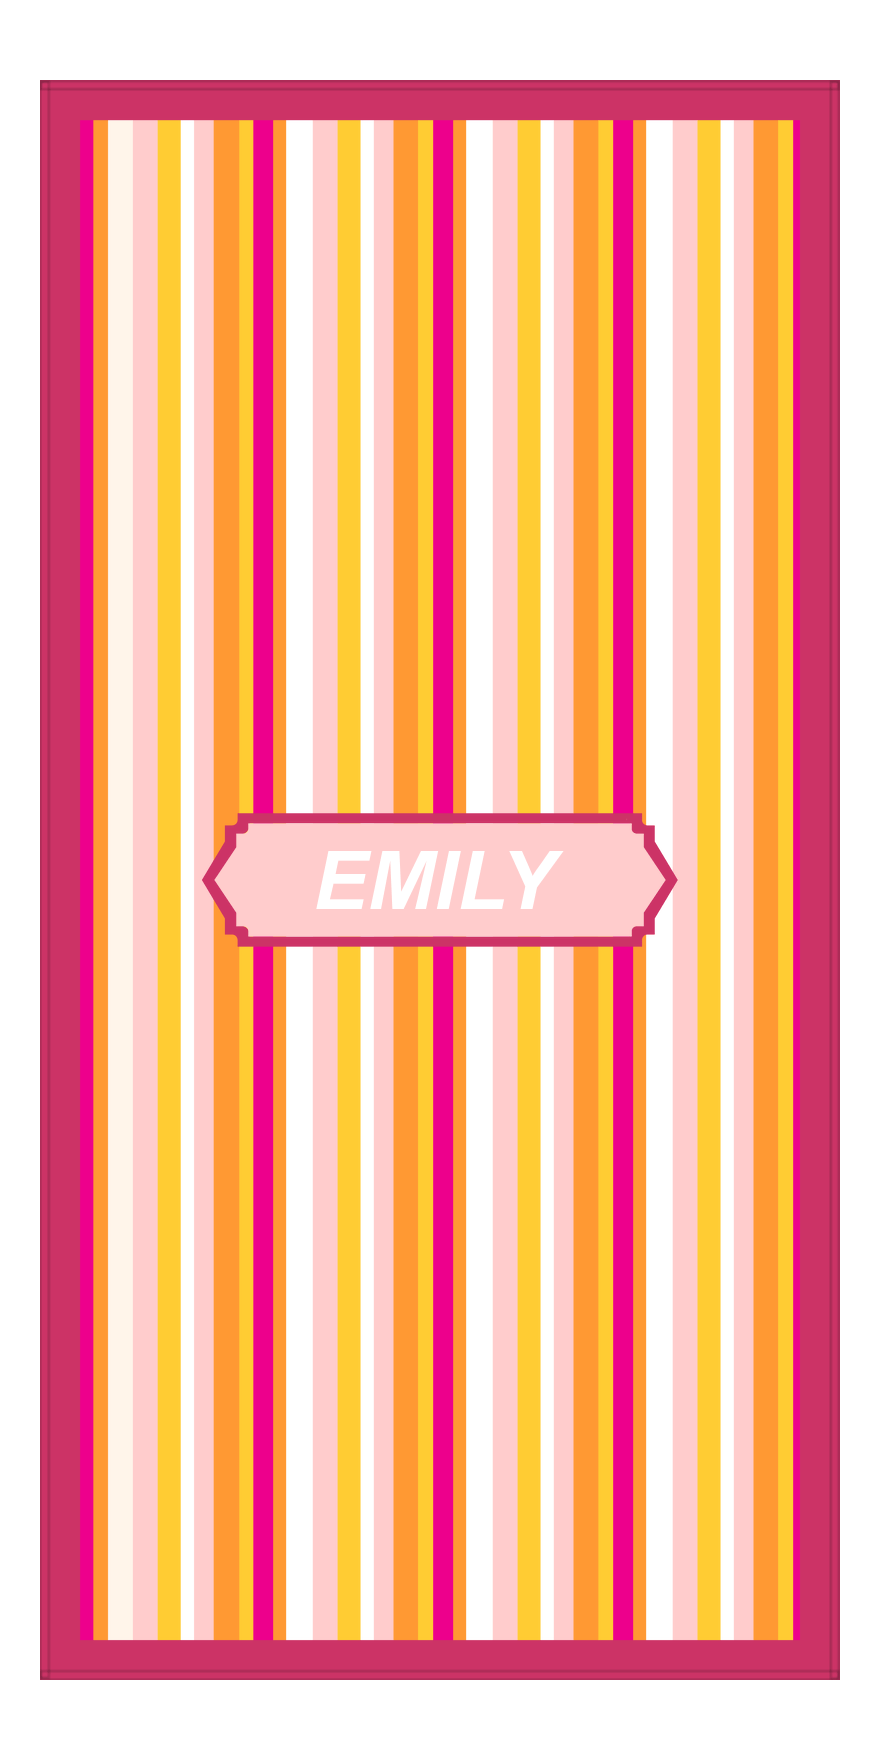 Personalized 5 Color Stripes 4 Repeat Beach Towel - Vertical - Pink and Orange - Oblong Frame - Front View